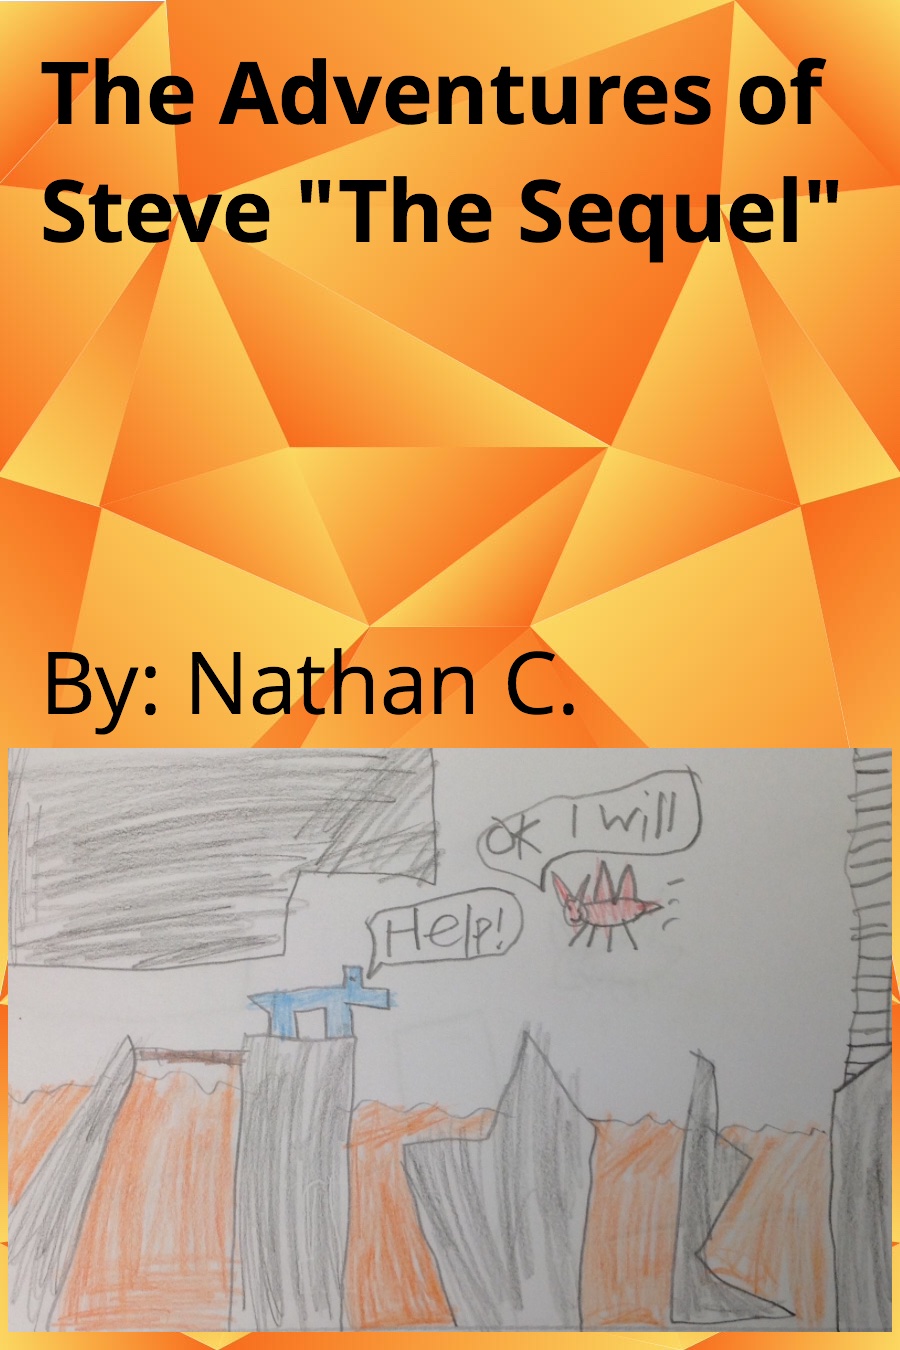 The Adventures of Steve: The Sequel by Nathan C